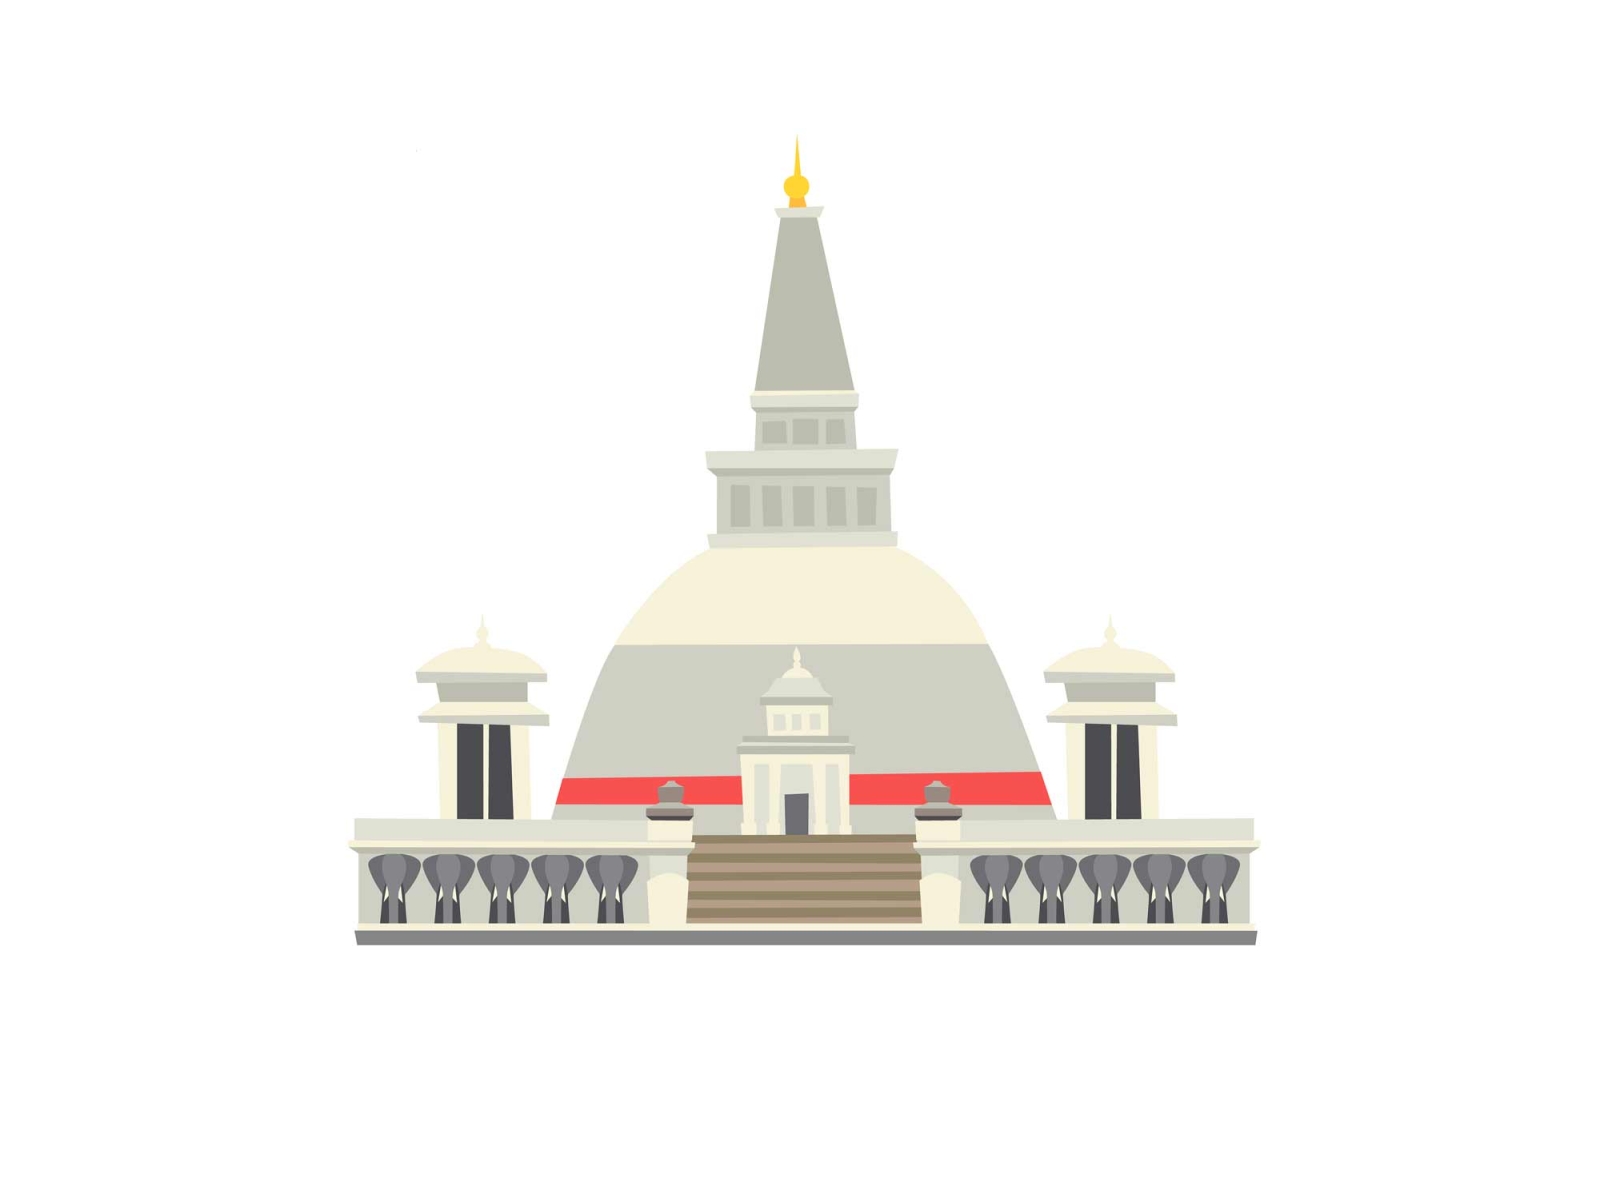 Buddhist stupa vector illustration by coffeee_in on Dribbble